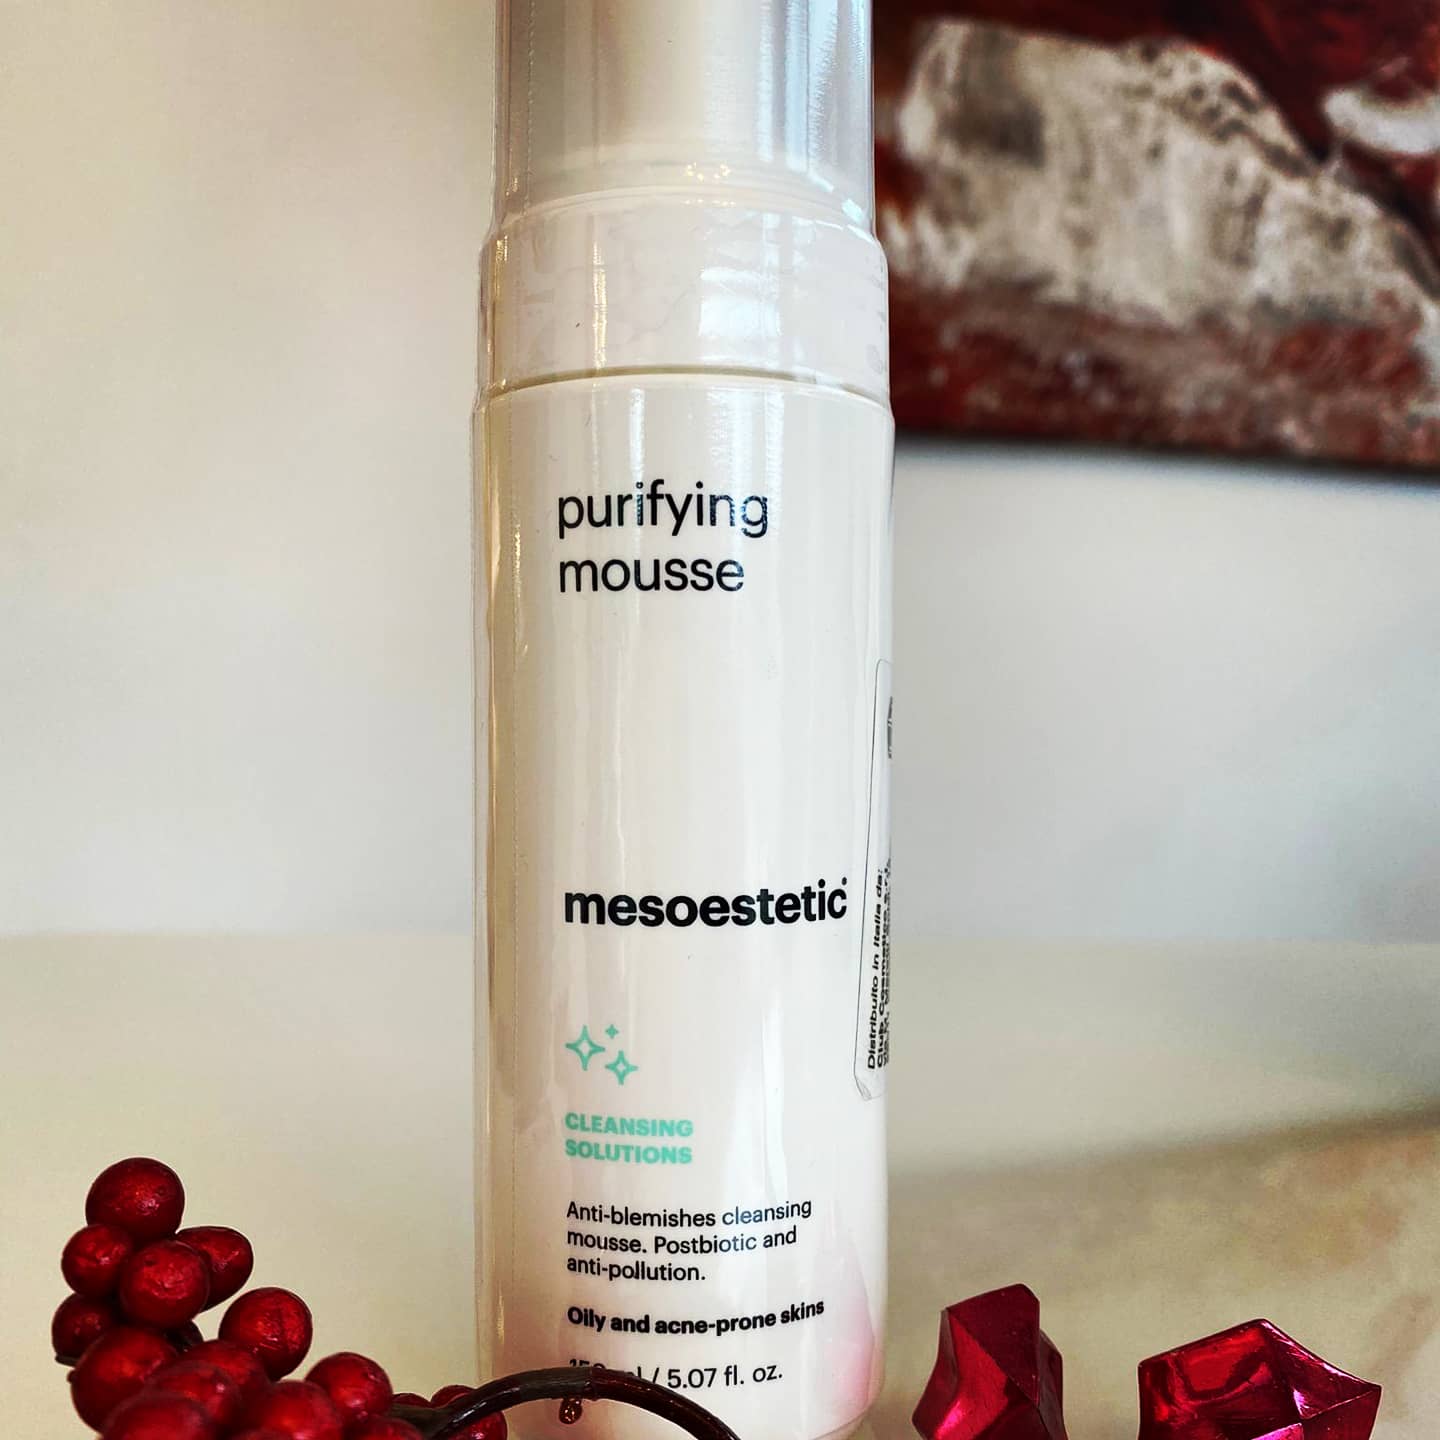 Purifying mousse 4